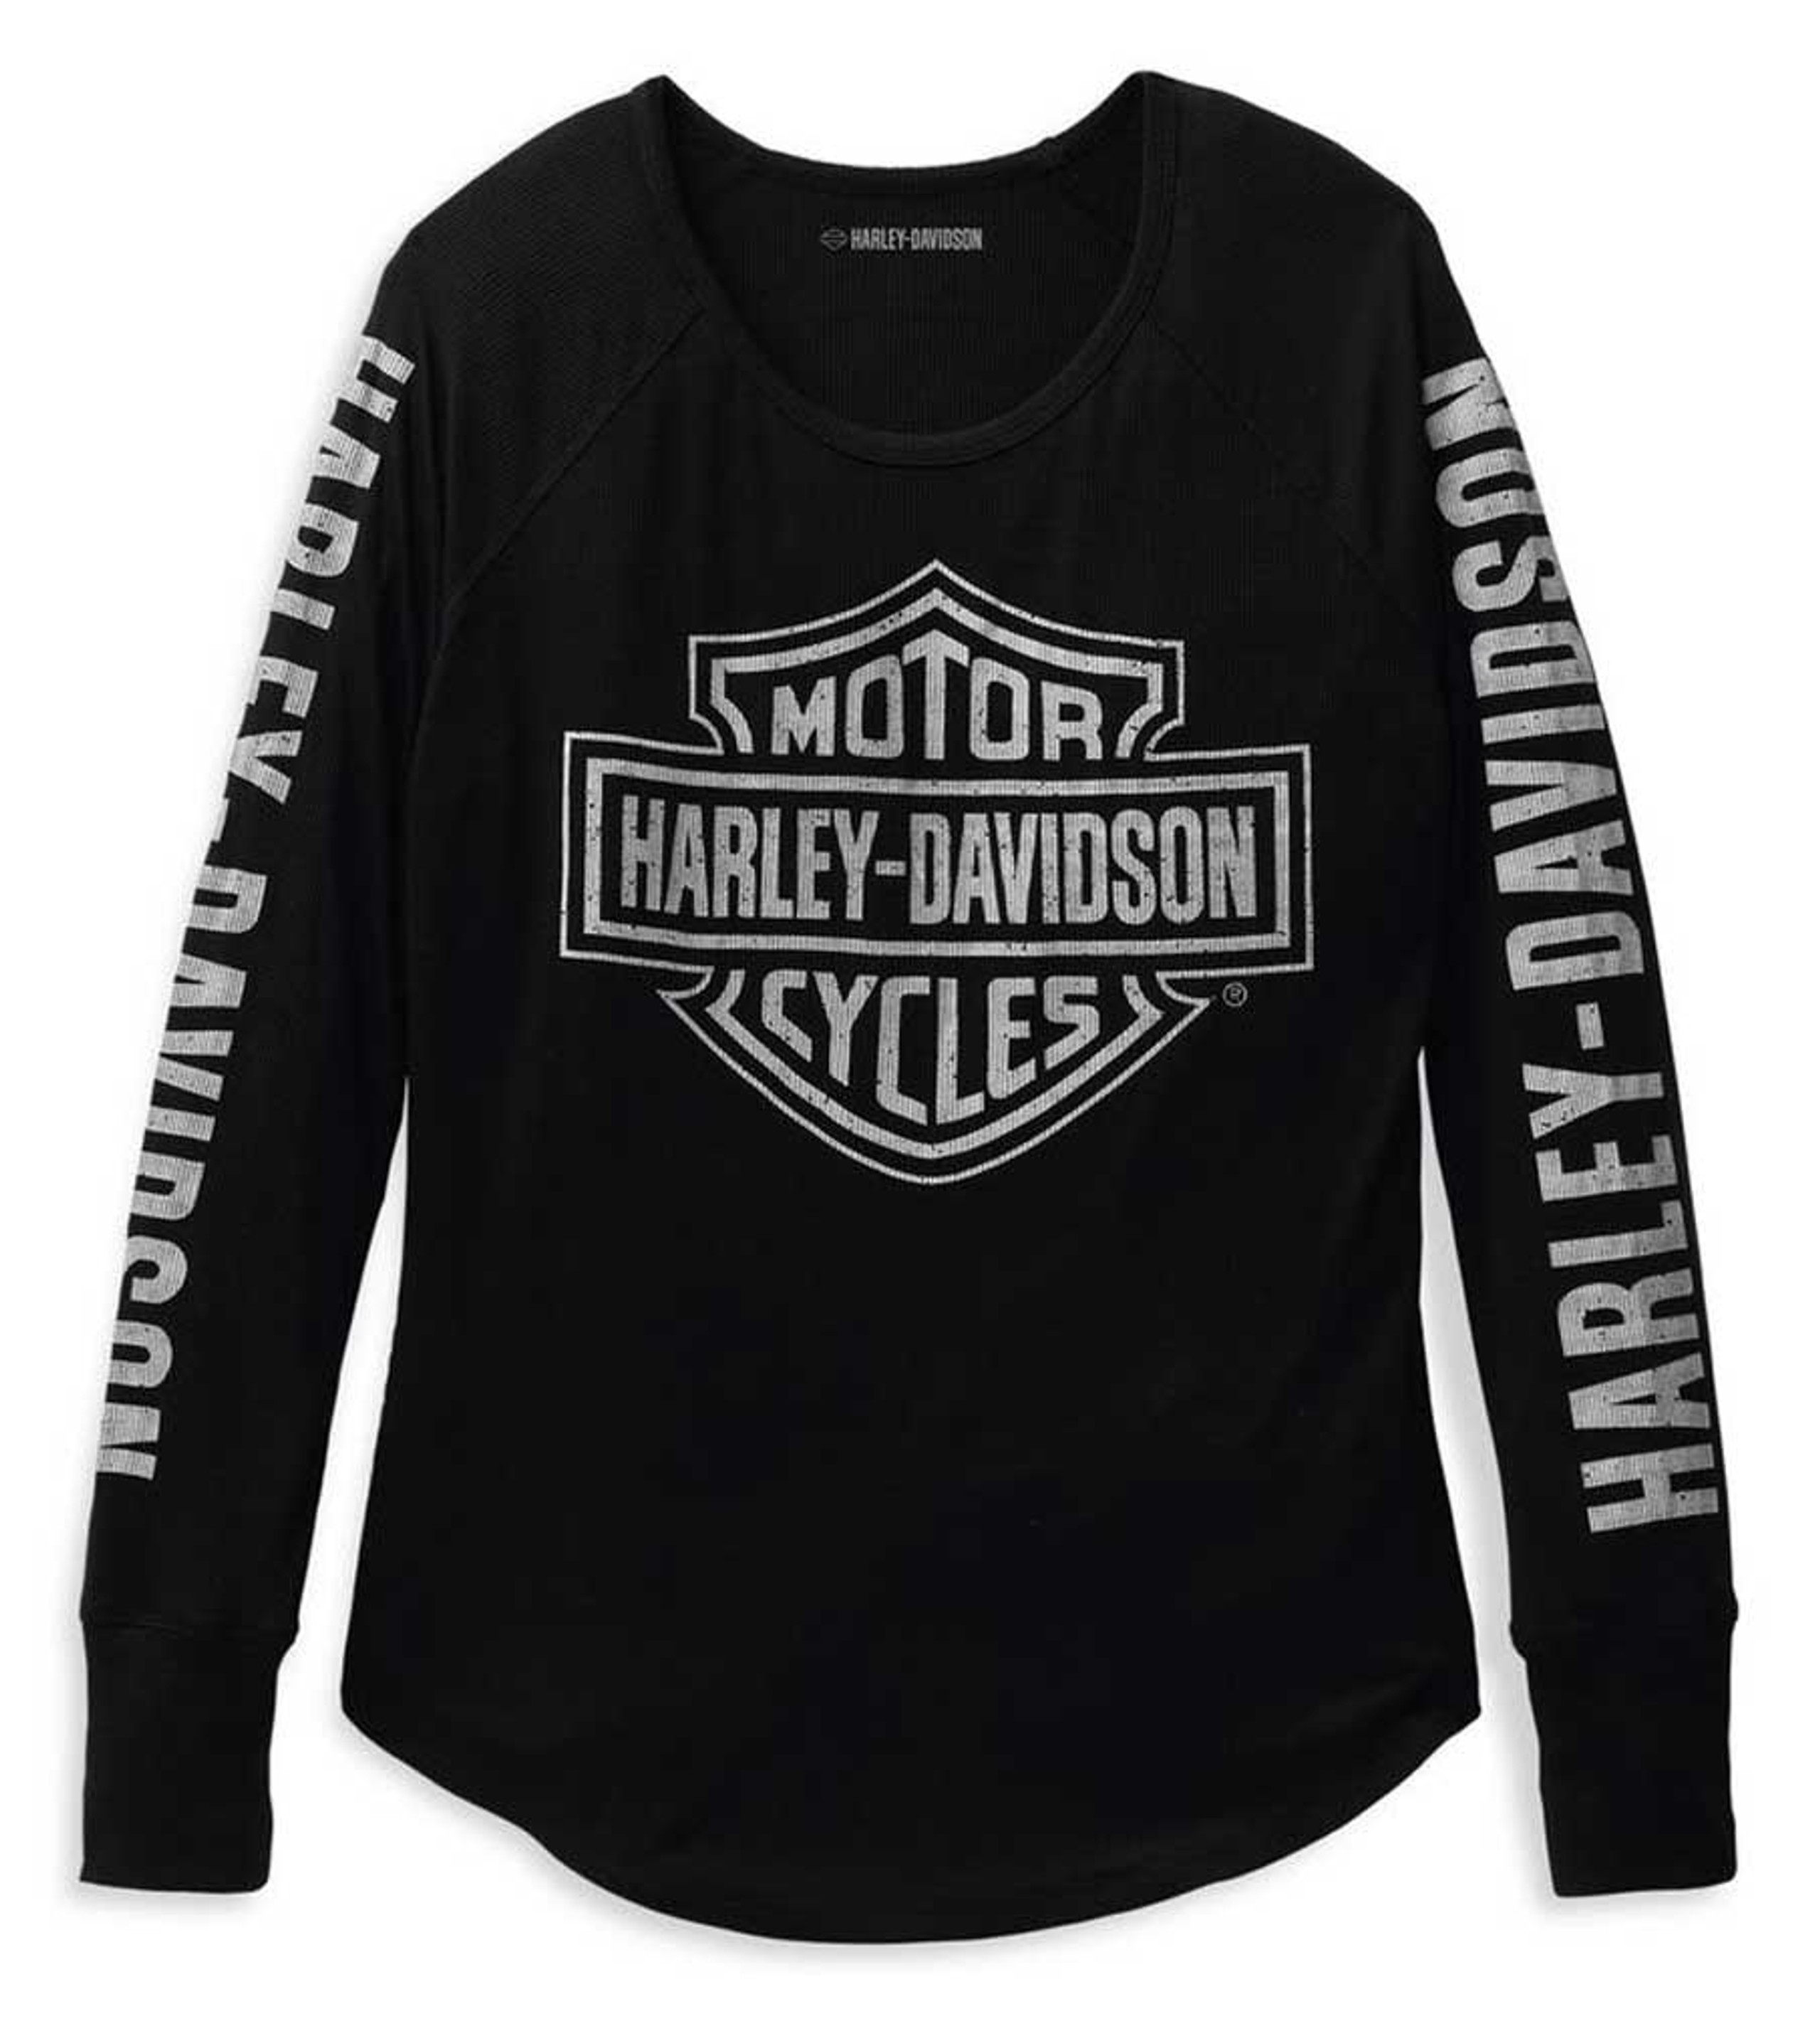 Harley Davidson® Womens Authentic Bar And Shield Rib Knit Top Black 99111 22vw Wisconsin 7262